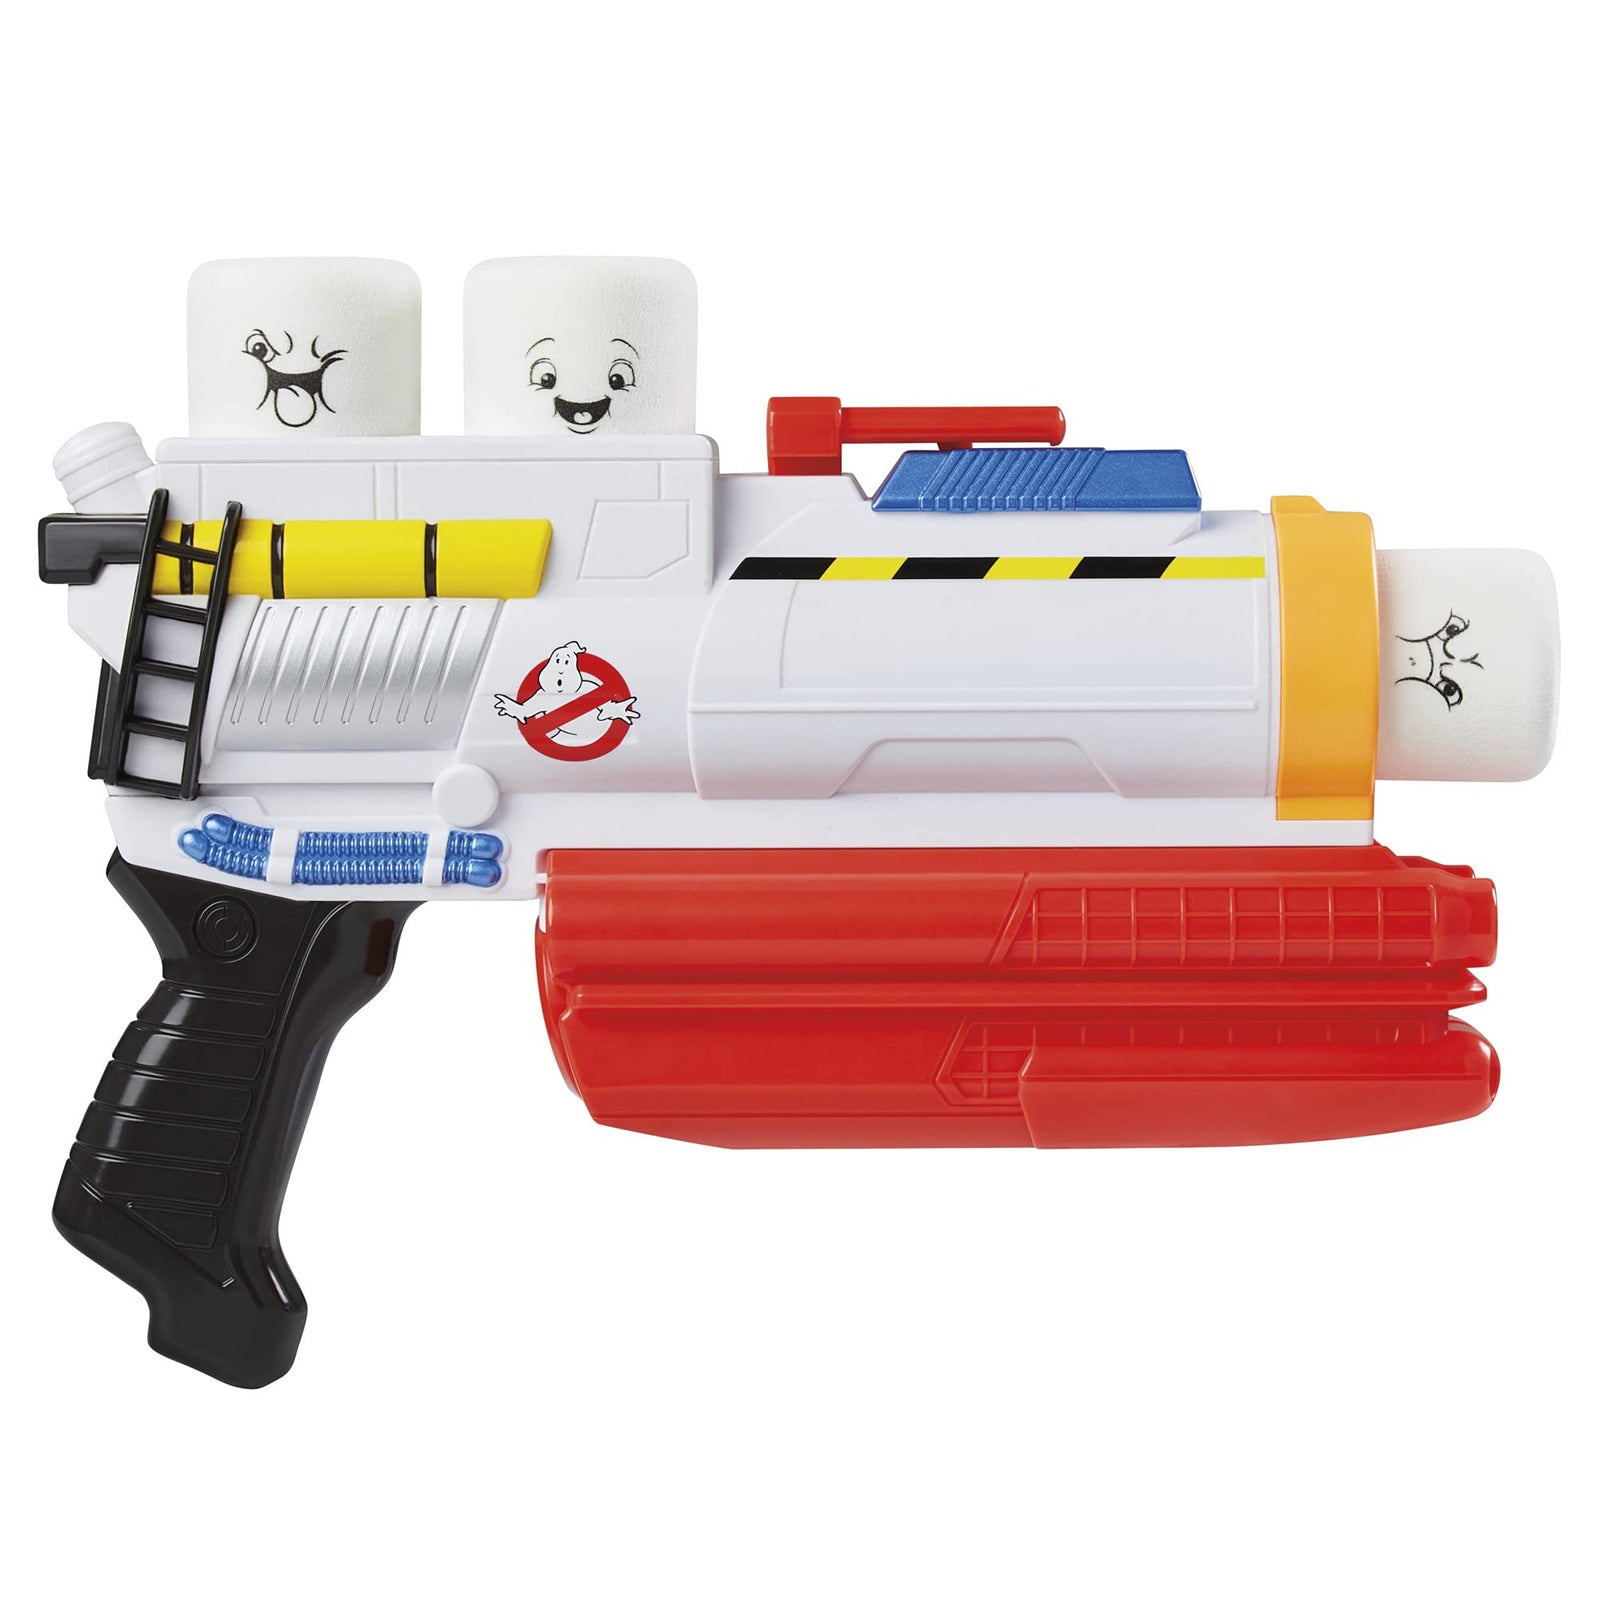 Hasbro Ghostbusters Mini-Puft Popper Blaster Action Ghostbusters: Afterlife Roleplay Toy with 3 Foam Puft Popper Projectiles for Kids Ages 8 and Up